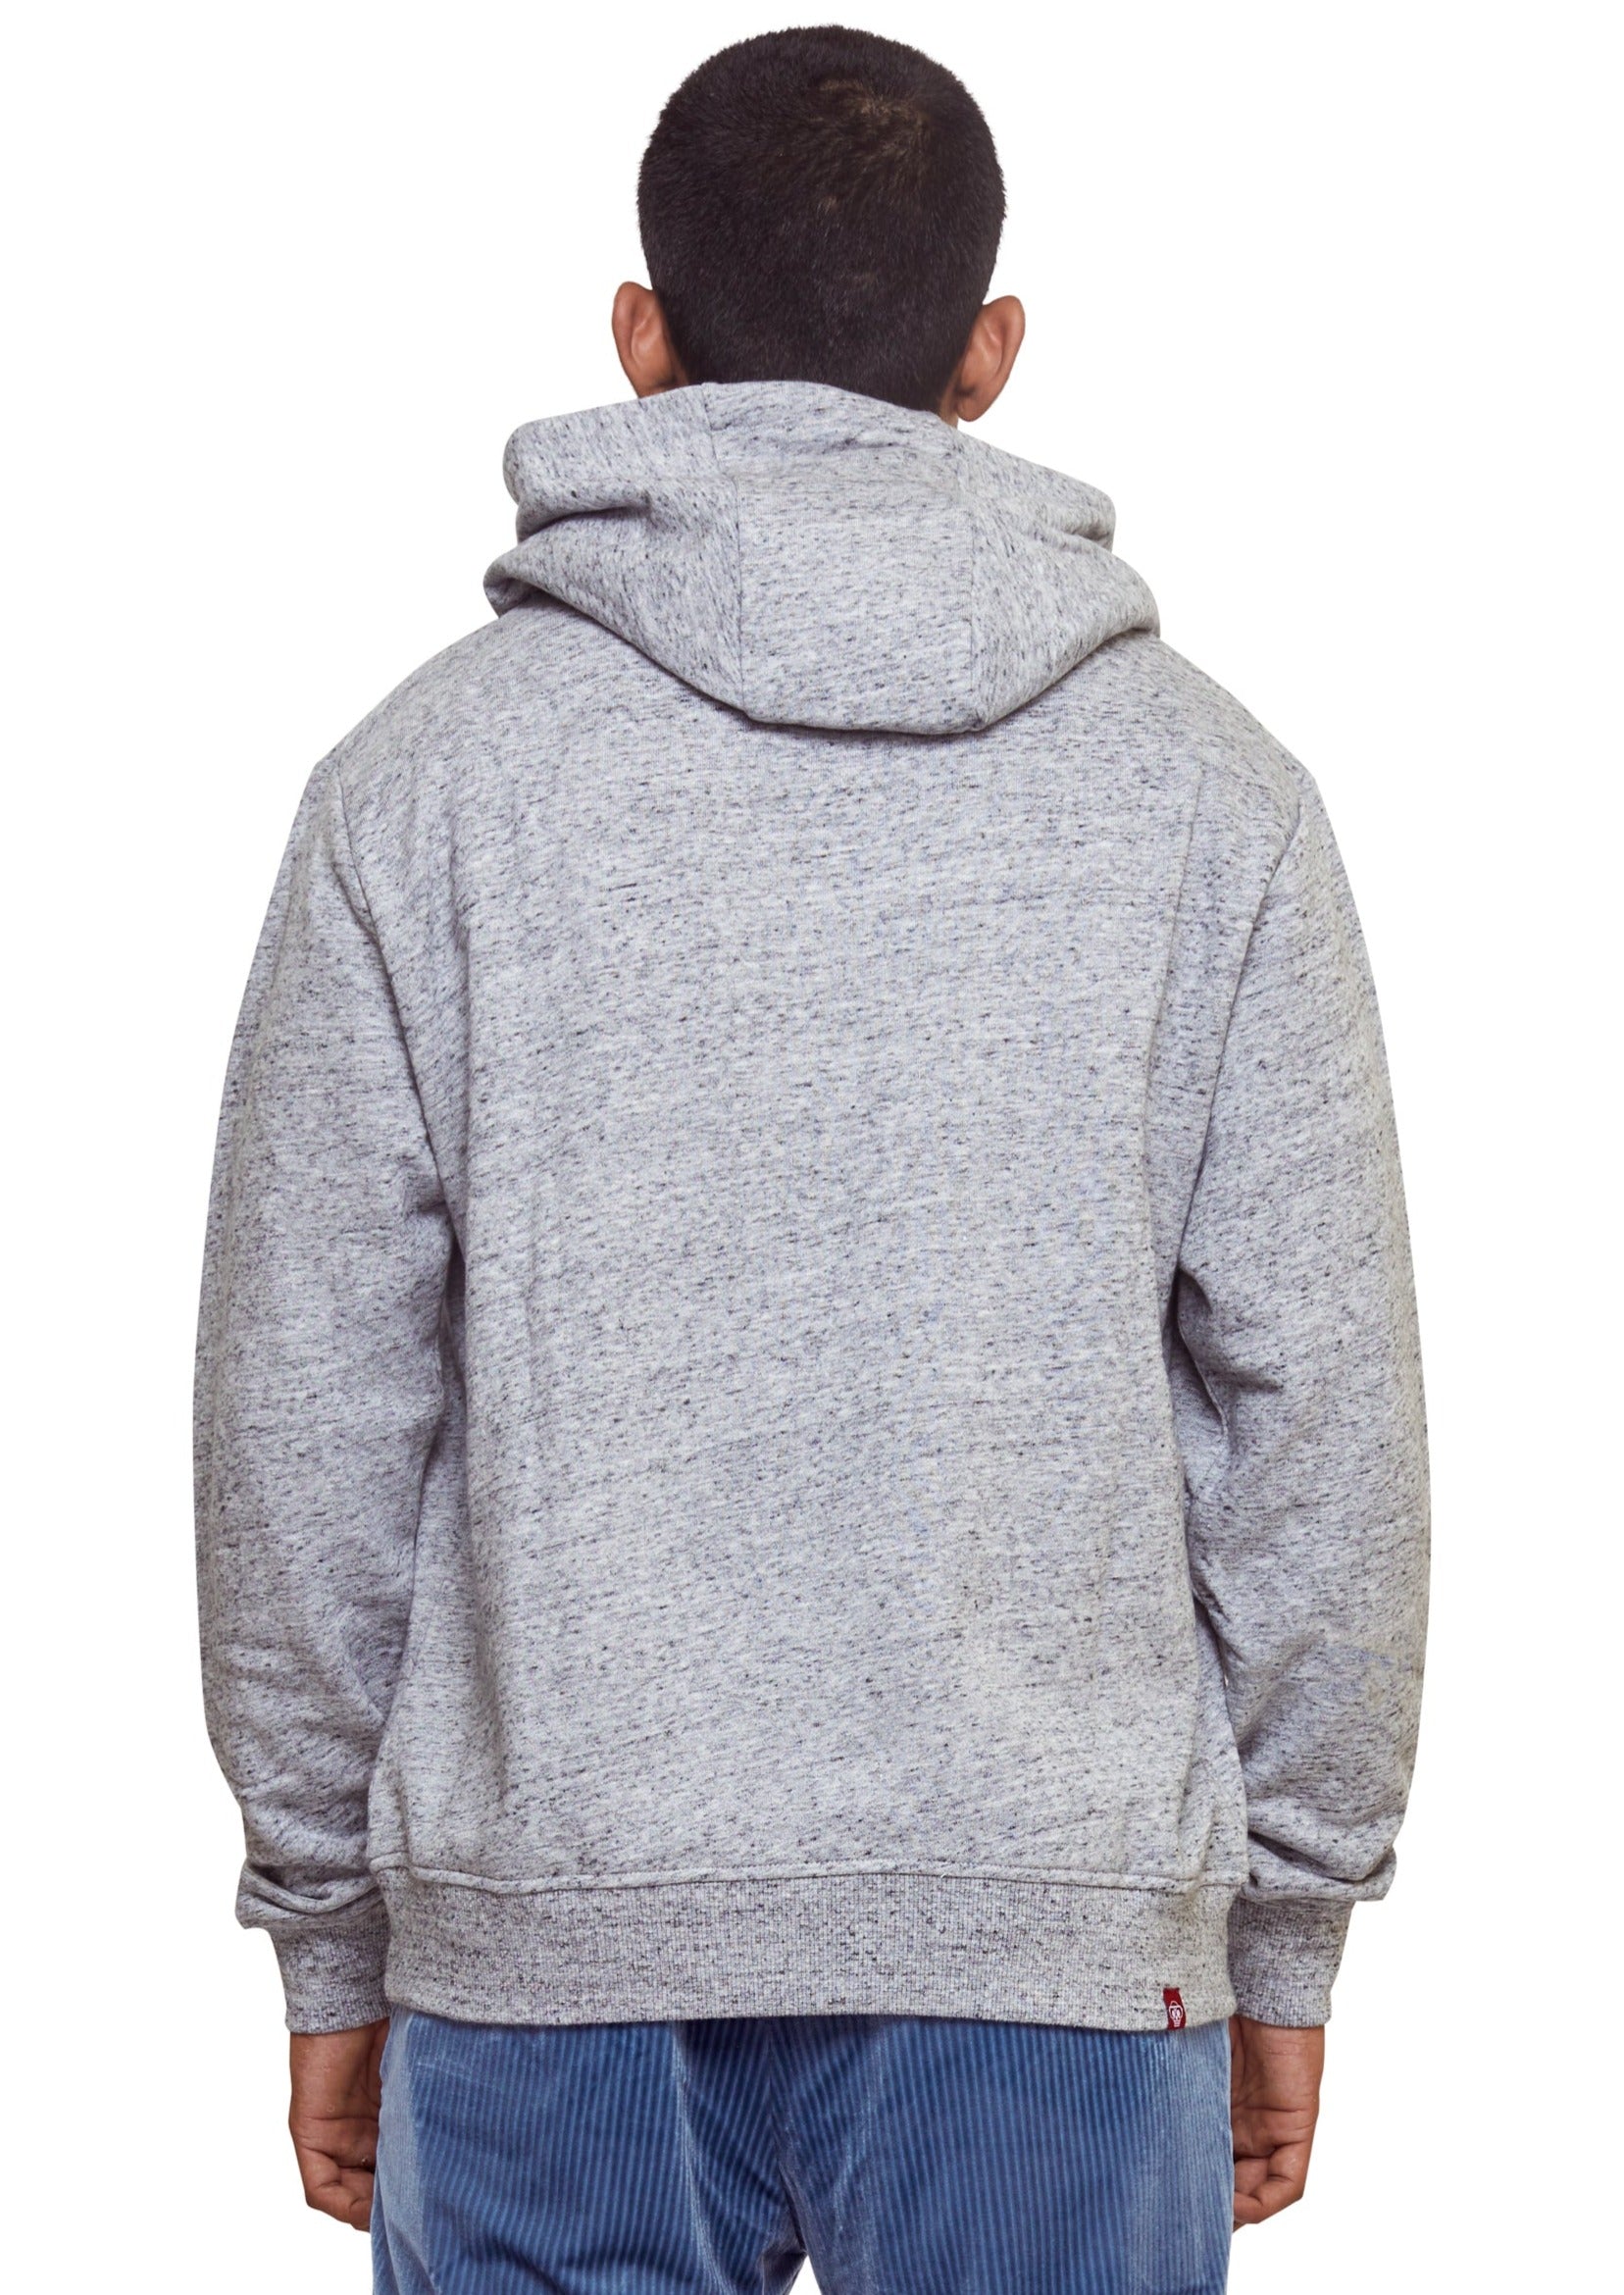 Grey Speckled hoodie with a graphic front design of a whistling felix and kangaroo pocket from the brand 8-bit